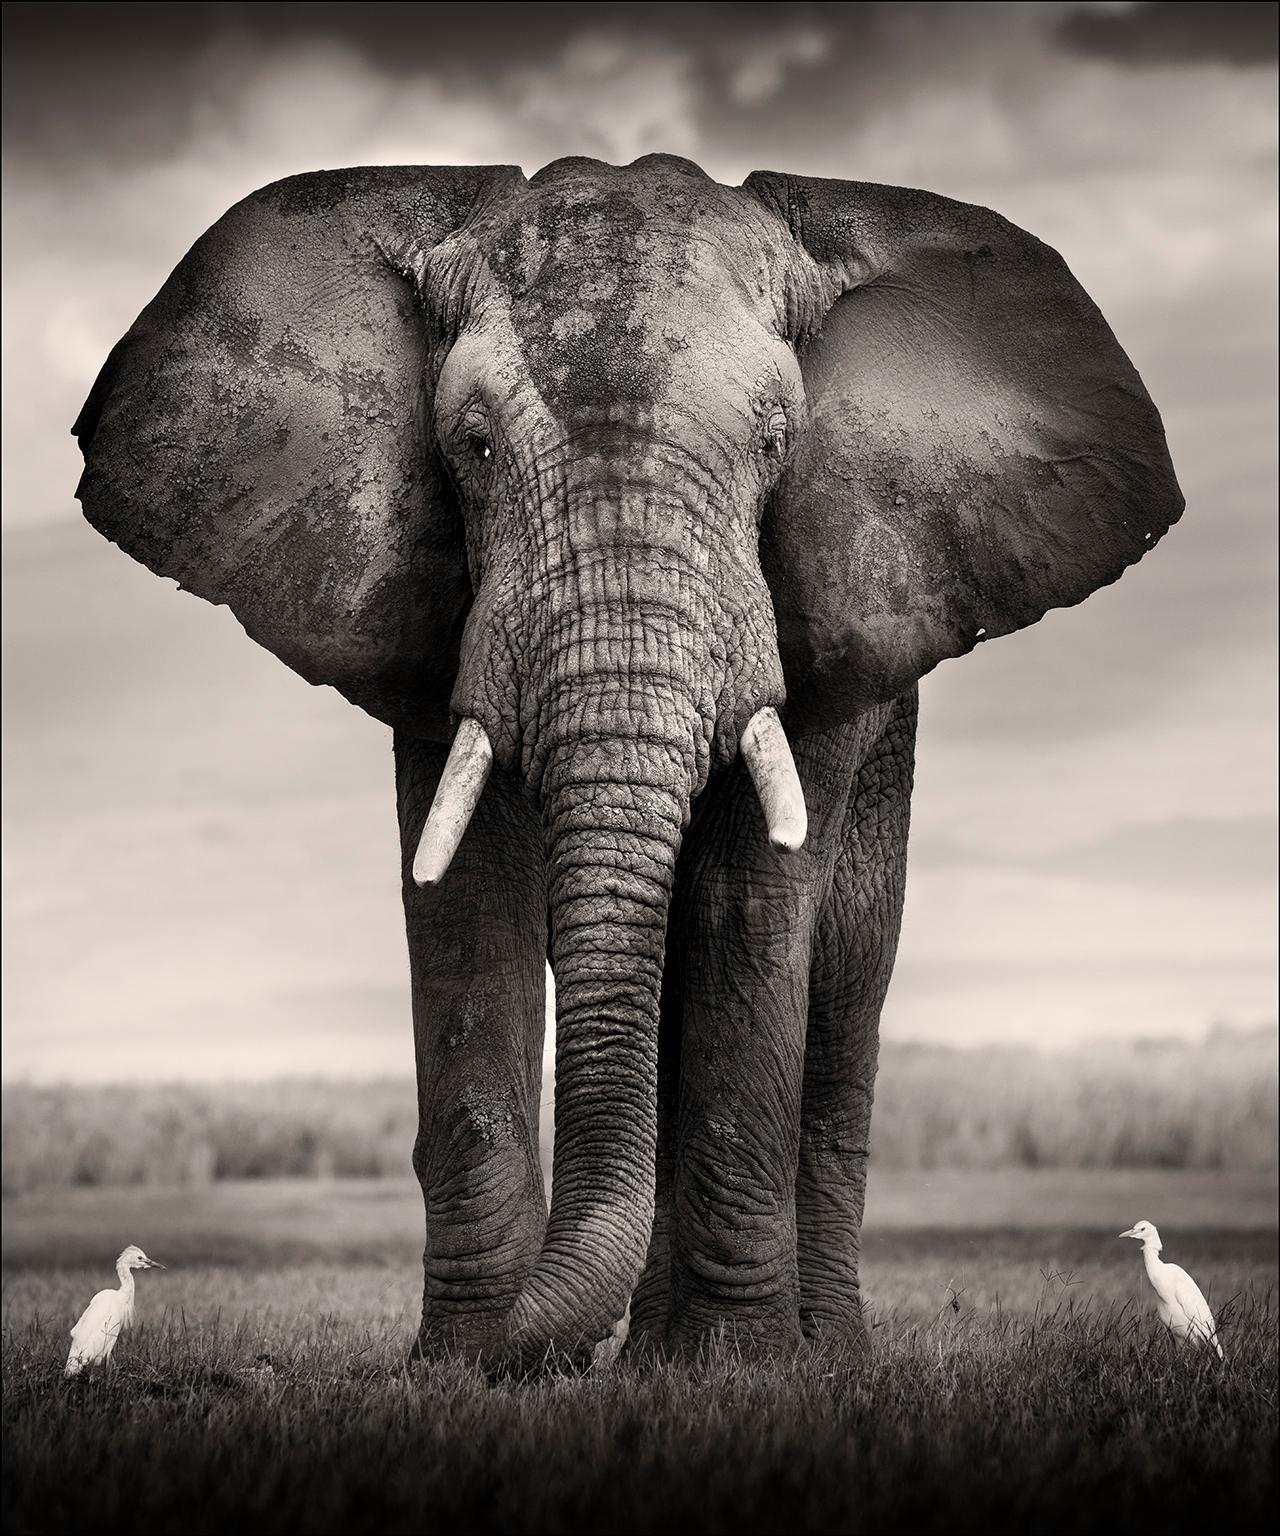 Joachim Schmeisser Black and White Photograph - Elephant Bull with two birds, animal, black and white photography, africa